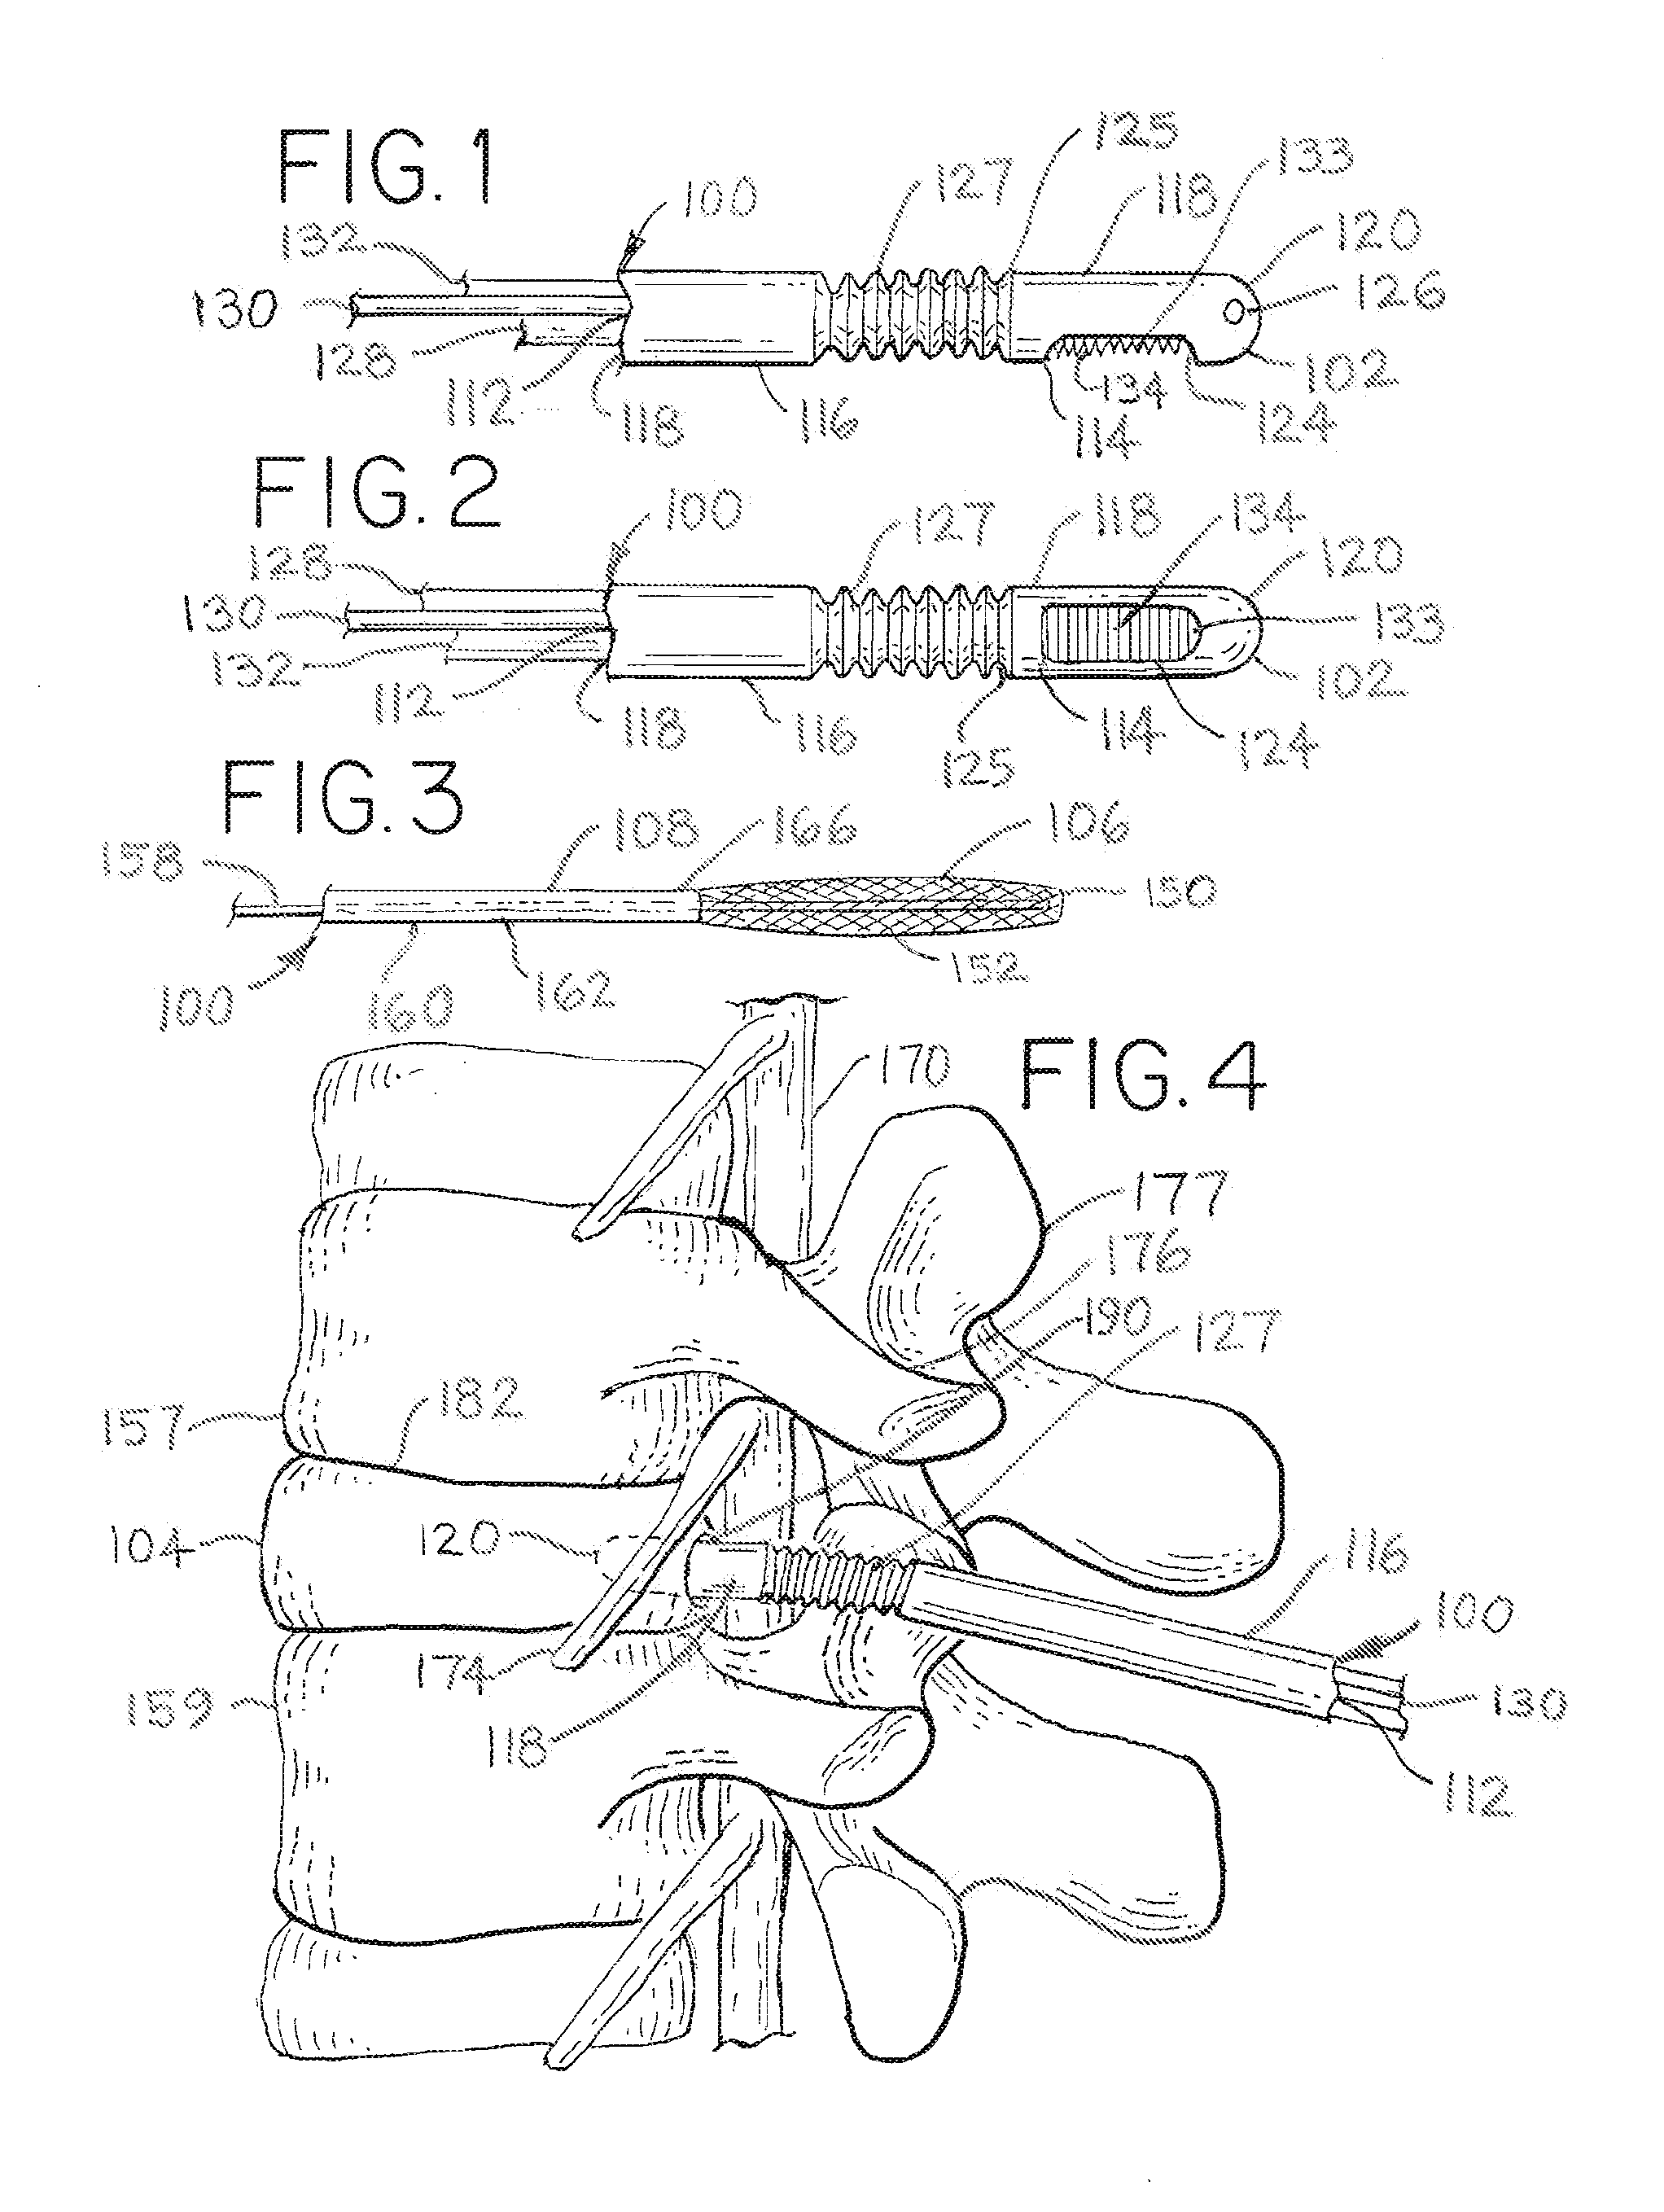 Minimally Invasive Surgical (MIS) Technique and System for Performing an Interbody Lumbar Fusion with a Navigatable Intervertebral Disc Removal Device and Collapsible Intervertebral Device